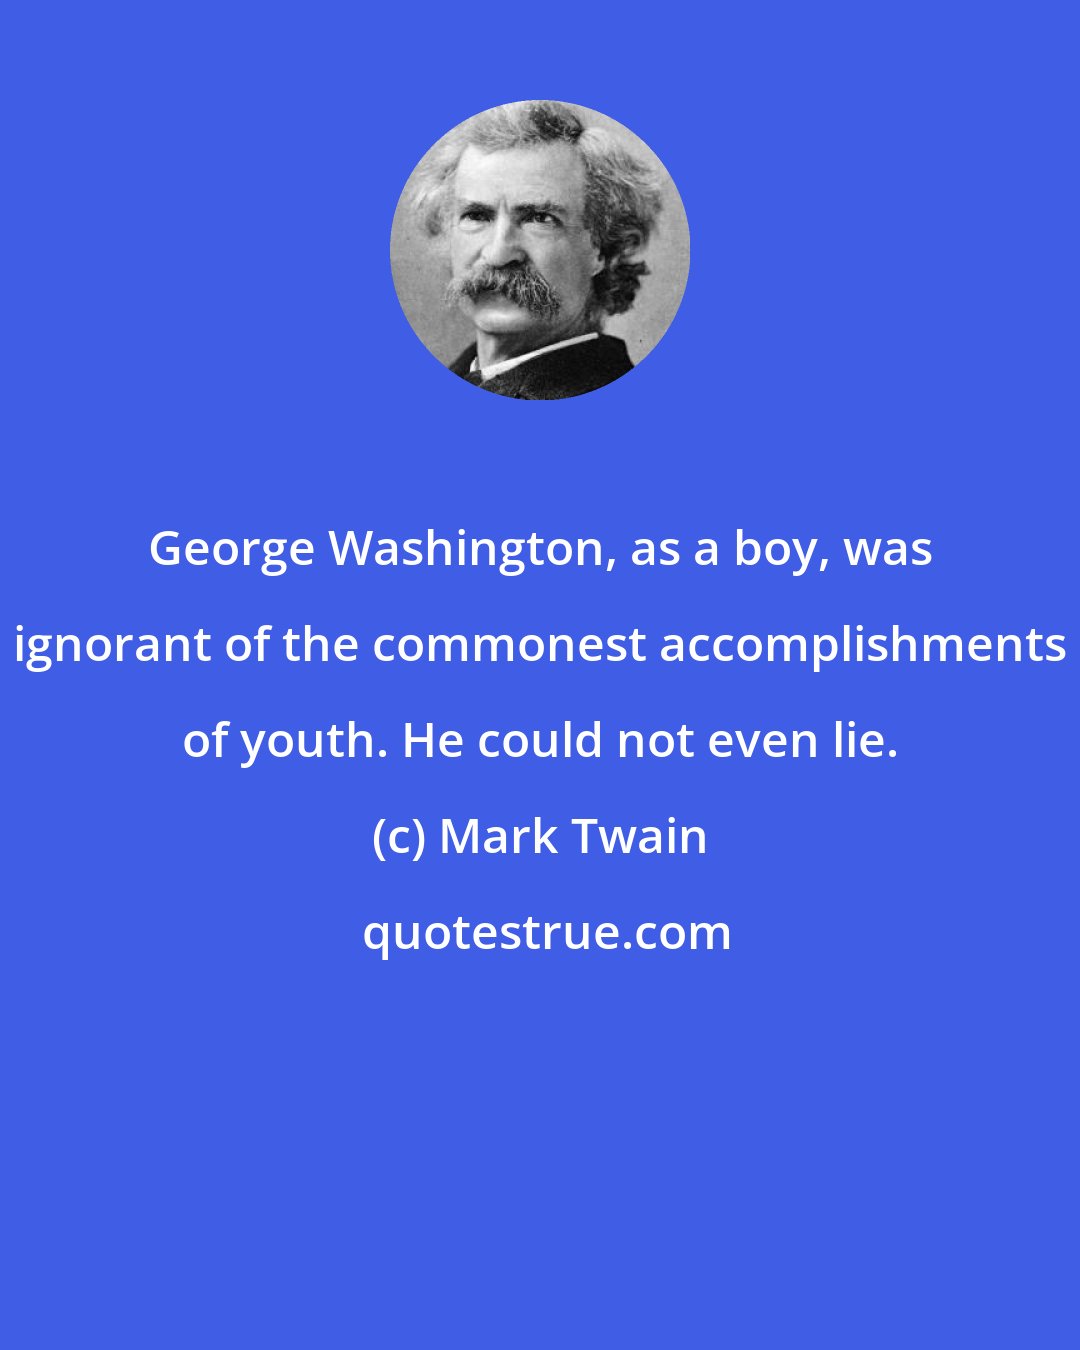 Mark Twain: George Washington, as a boy, was ignorant of the commonest accomplishments of youth. He could not even lie.